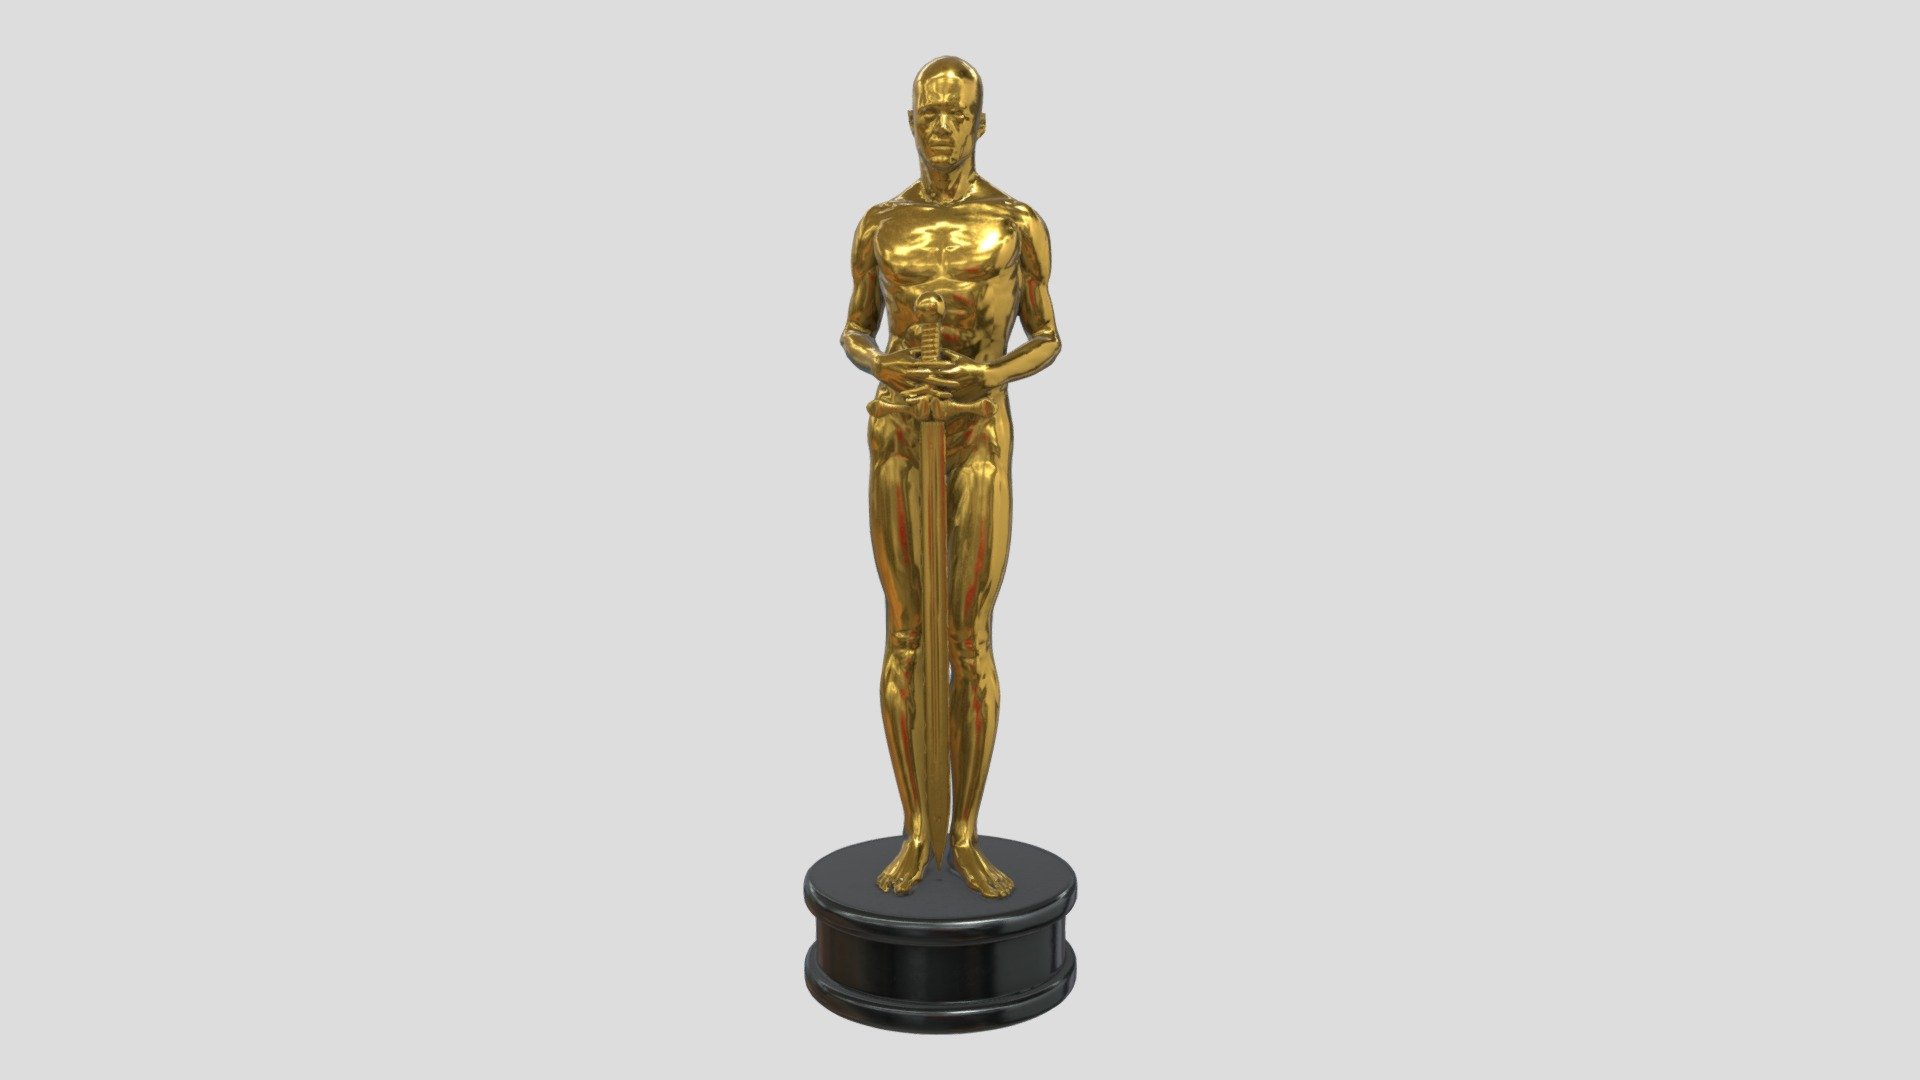 The Oscar Award looks like a naked man with his hands crossed on his chest, holding a long sword, standing on a five-ring film tray, each ring represents an important work department of the Academy of Motion Picture Arts and Sciences: Producer, Director , screenwriters, actors, and technical staff. Meyer allocated $500 to make the original trophy, which was made by George Stanley. The trophy was thirteen and a half inches tall and weighed six and three-quarters of a pound. It was made of alloy on the inside and had a layer of gold flakes on the outside to make it look shiny. It shines, so it is called the Academy Award 3d model